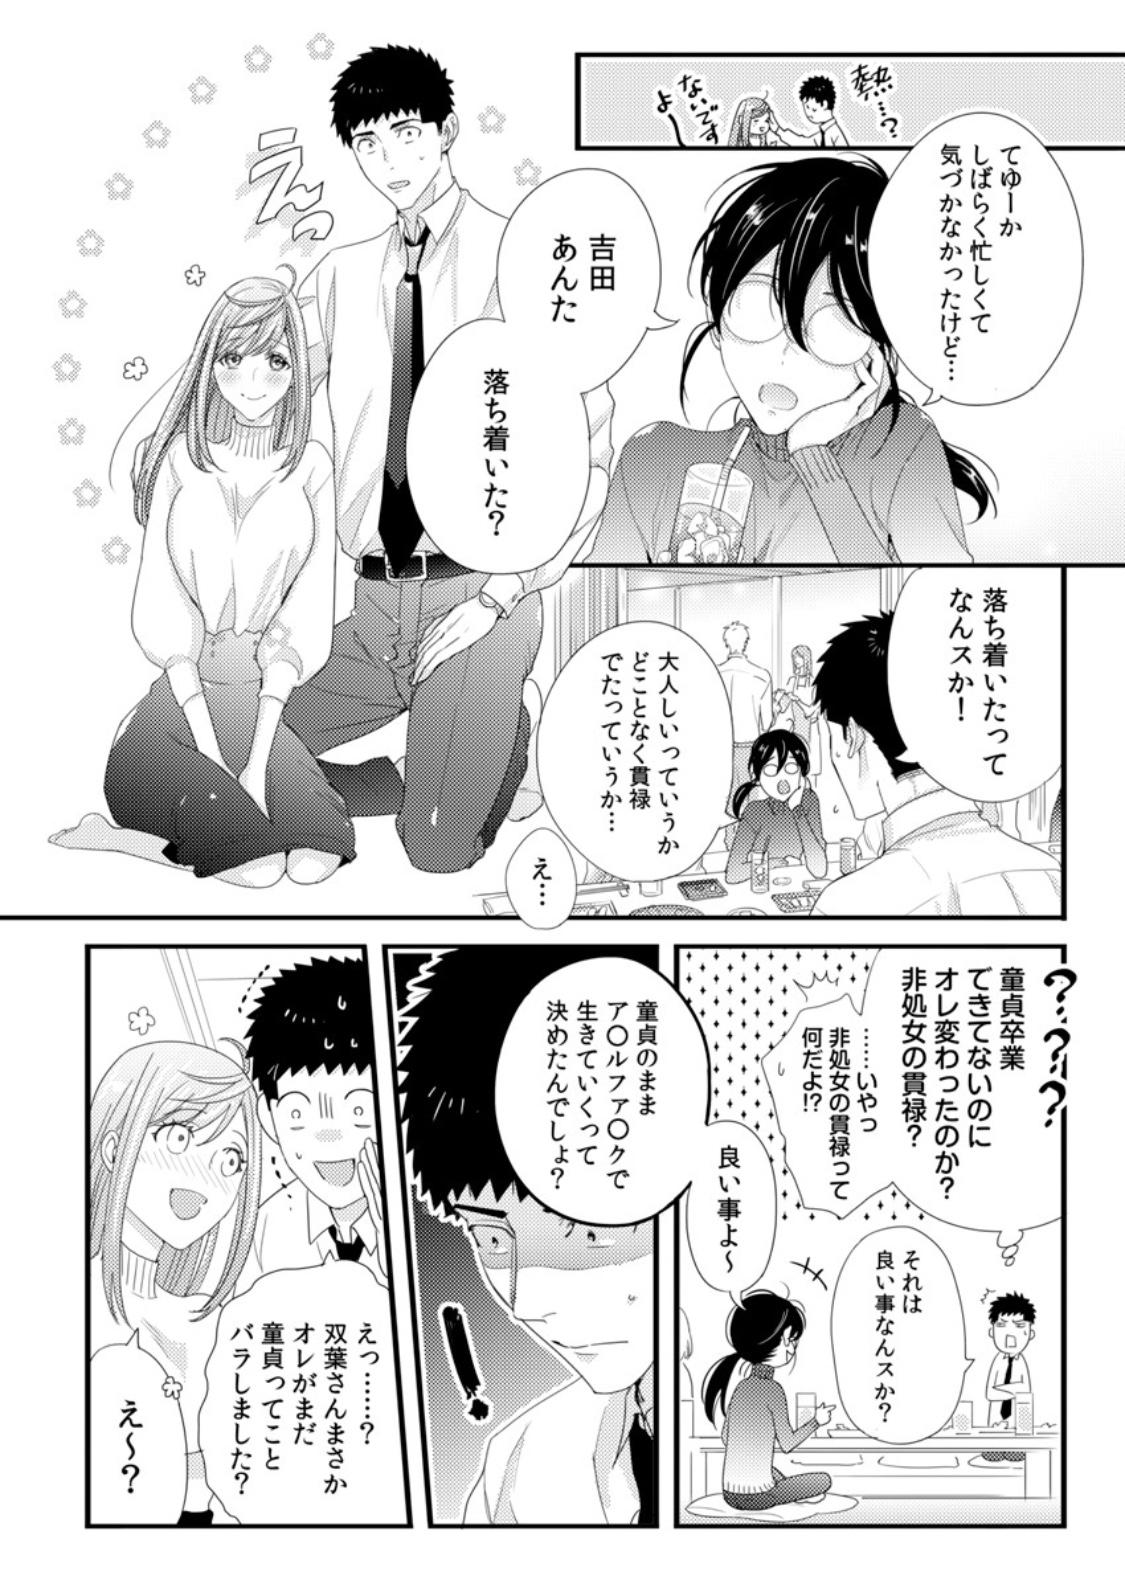 Please Let Me Hold You Futaba-San! Ch. 1-4 84